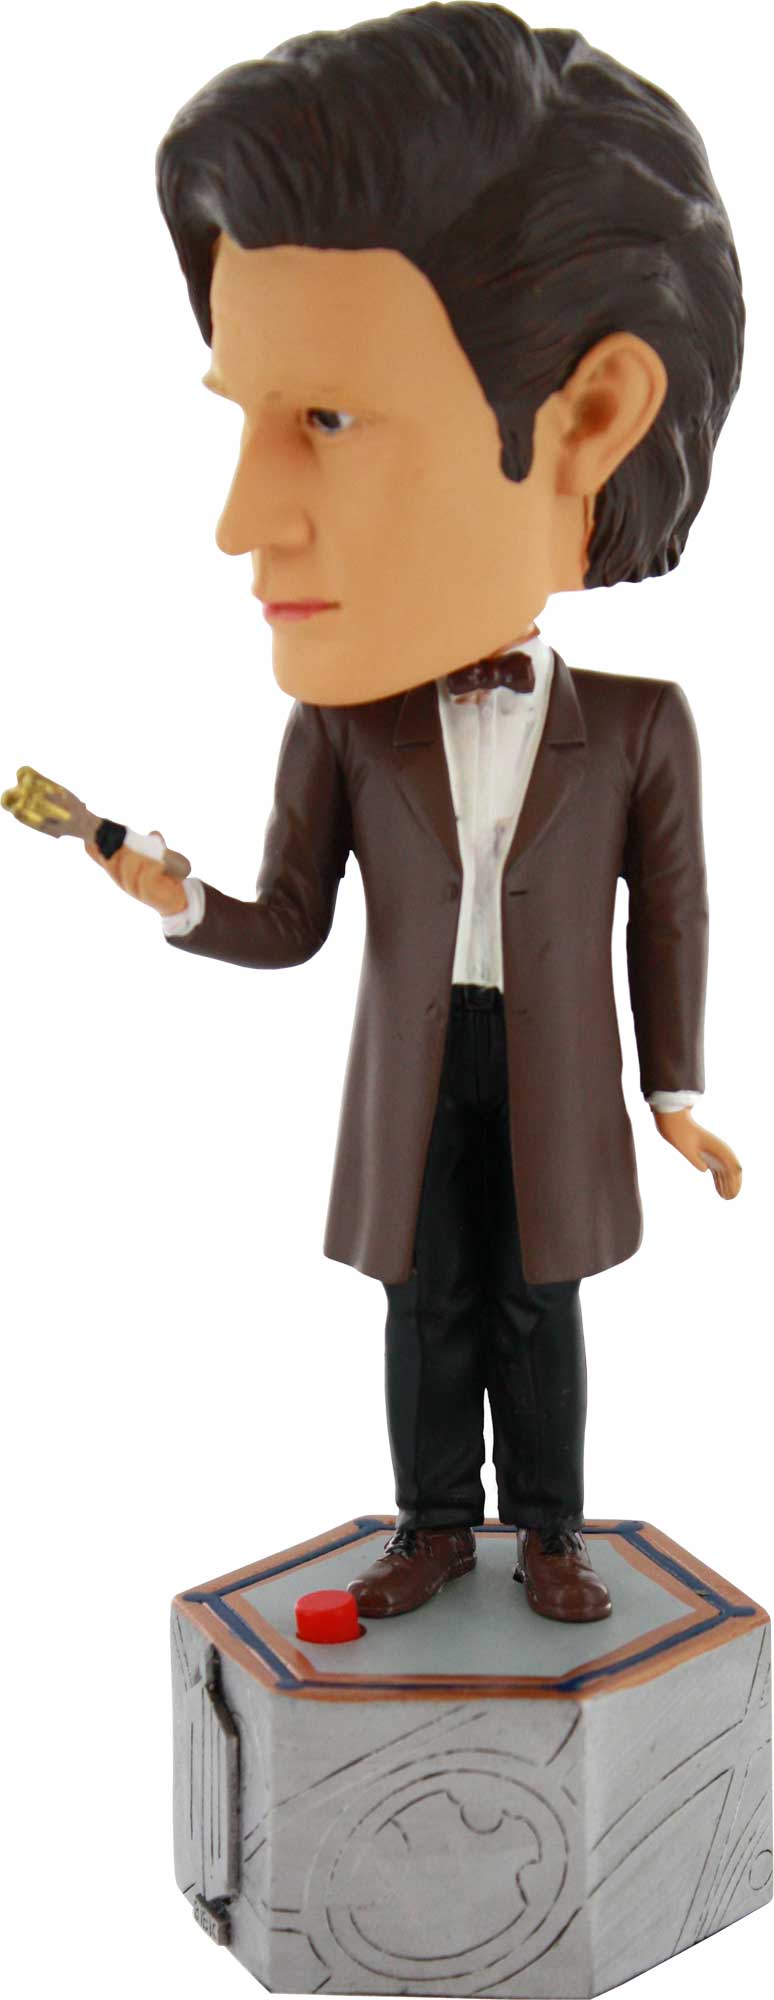 Doctor Who: Electronic 11th Doctor Bobblehead (Damaged)